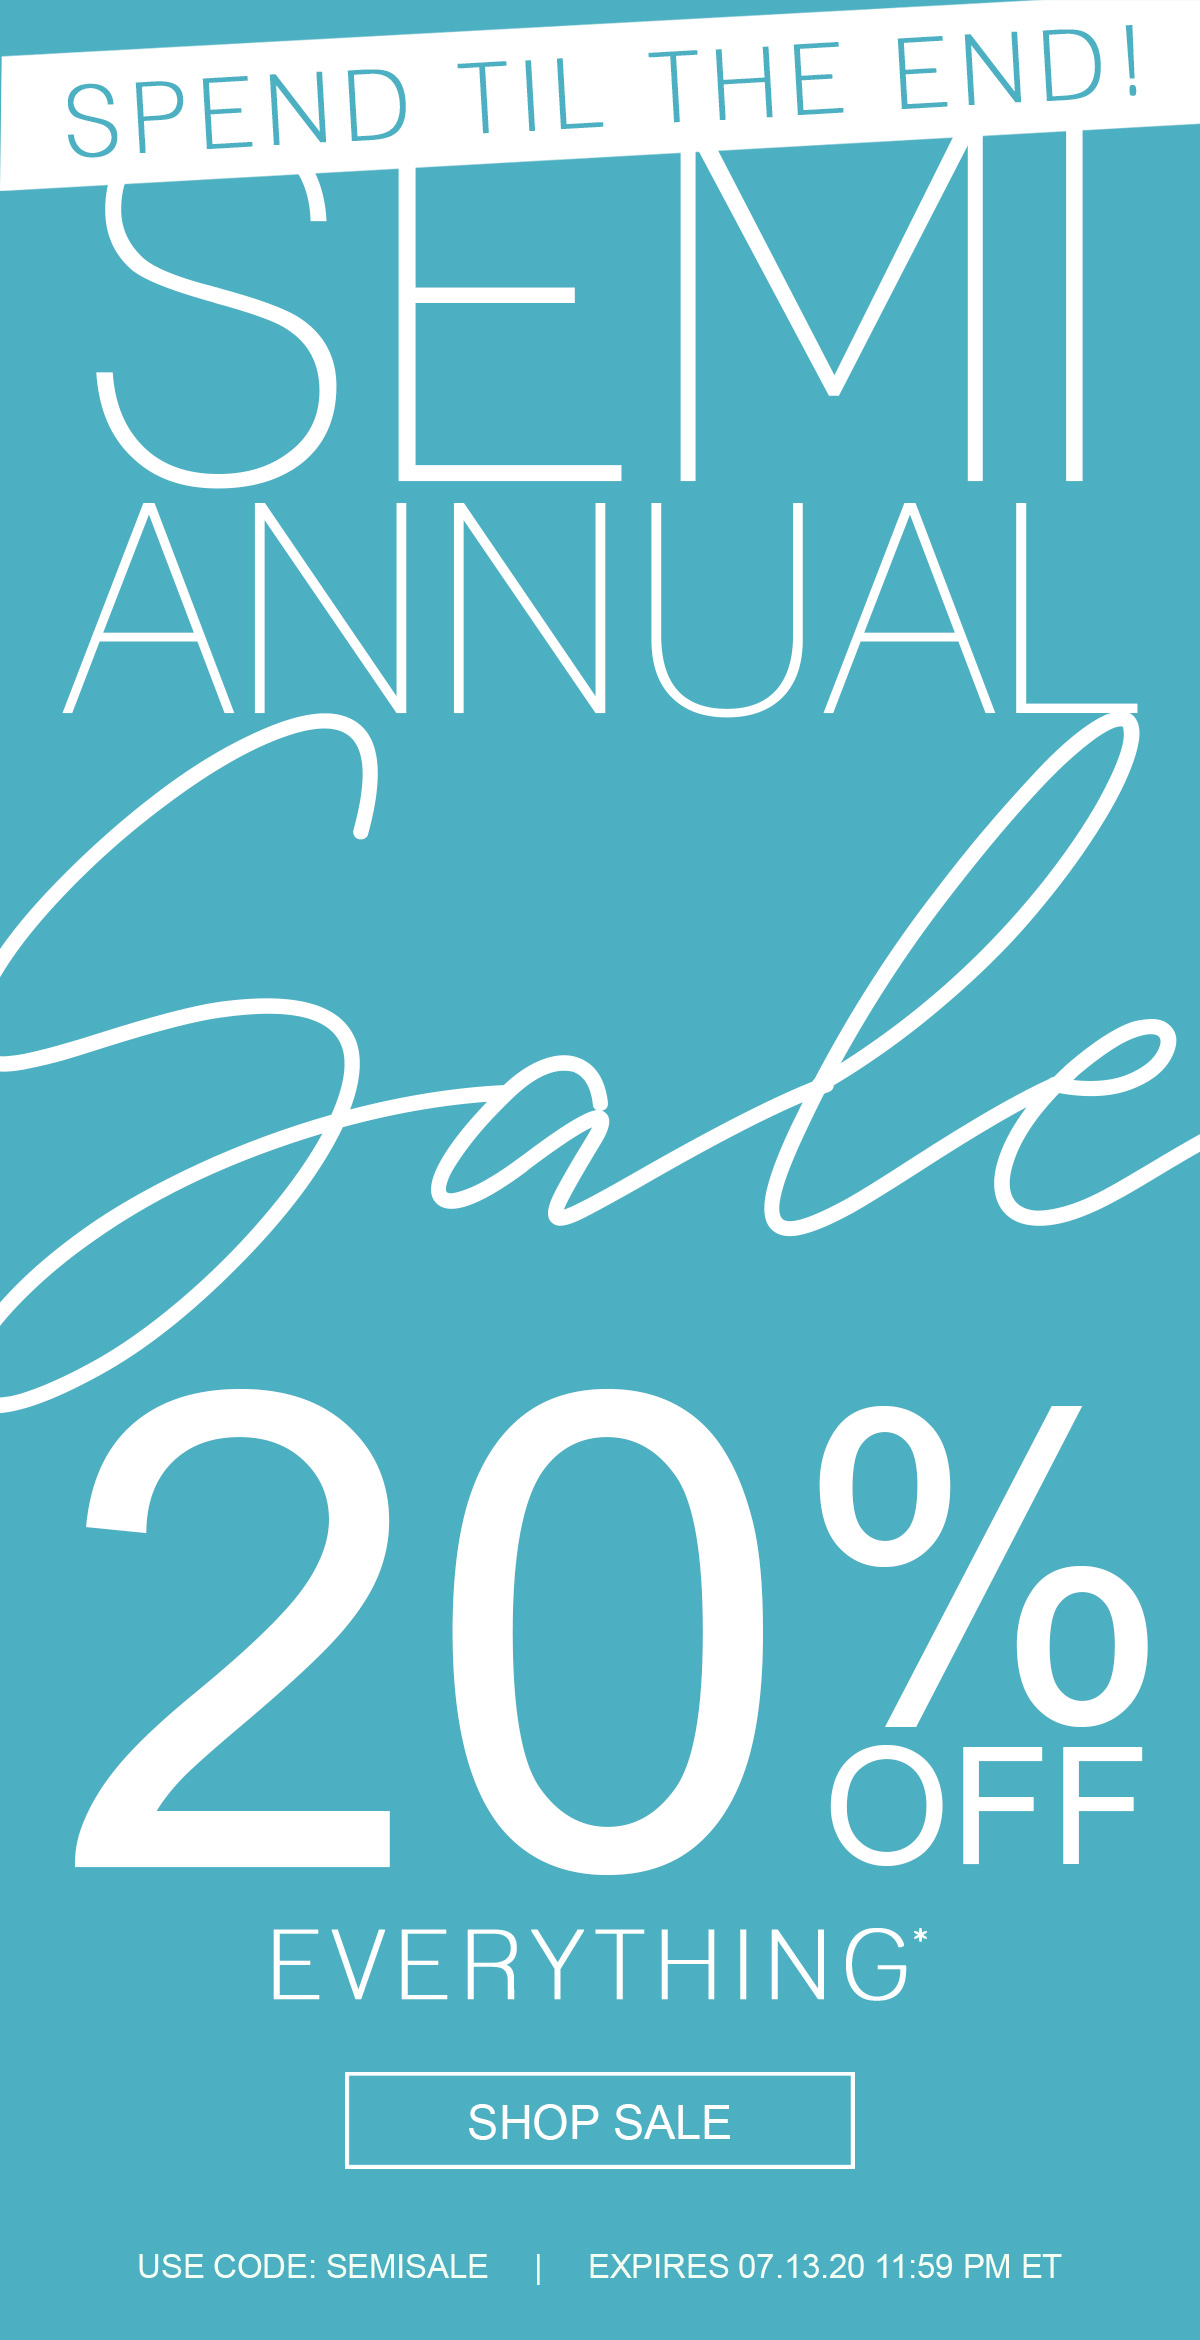 Spend til the end!   Semi Annual Sale  20% off everything*  Shop Sale  Use code: SEMISALE  Expires 07.13.20 11:59 PM ET